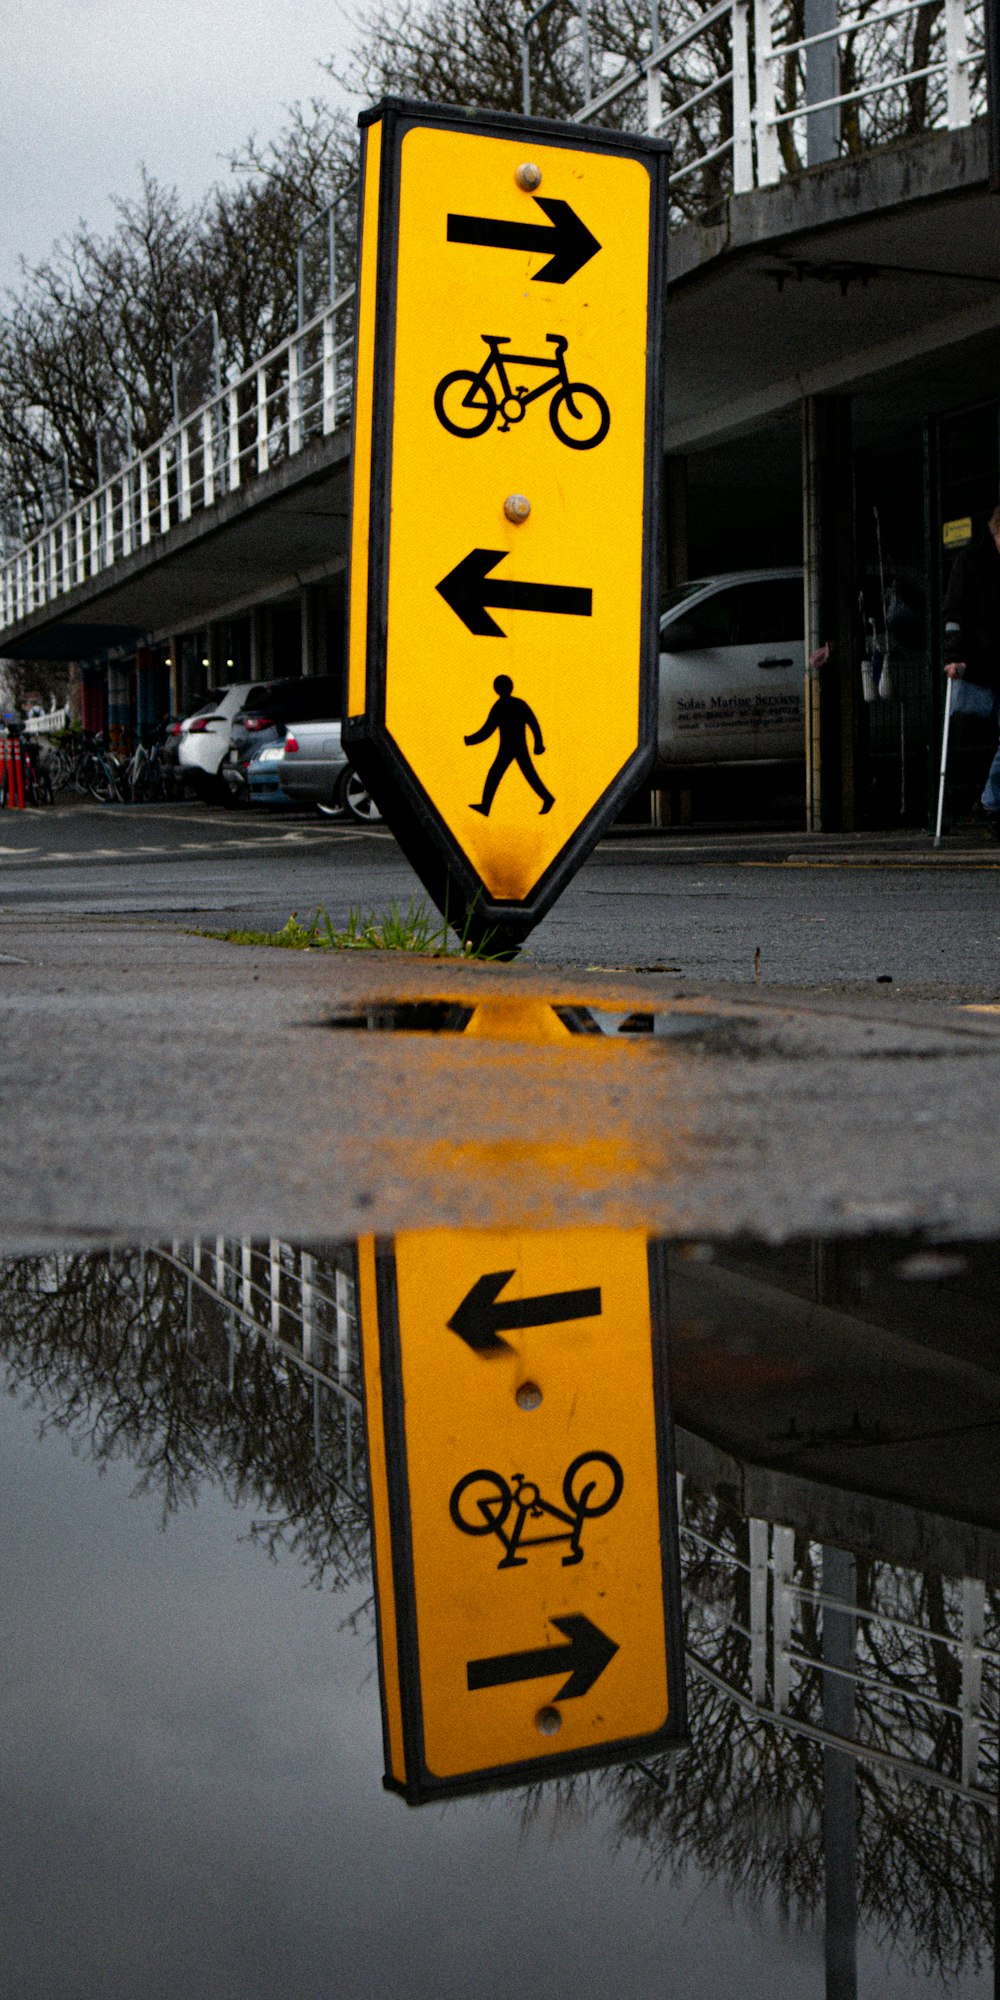 a yellow street sign with a reflection of a person on it